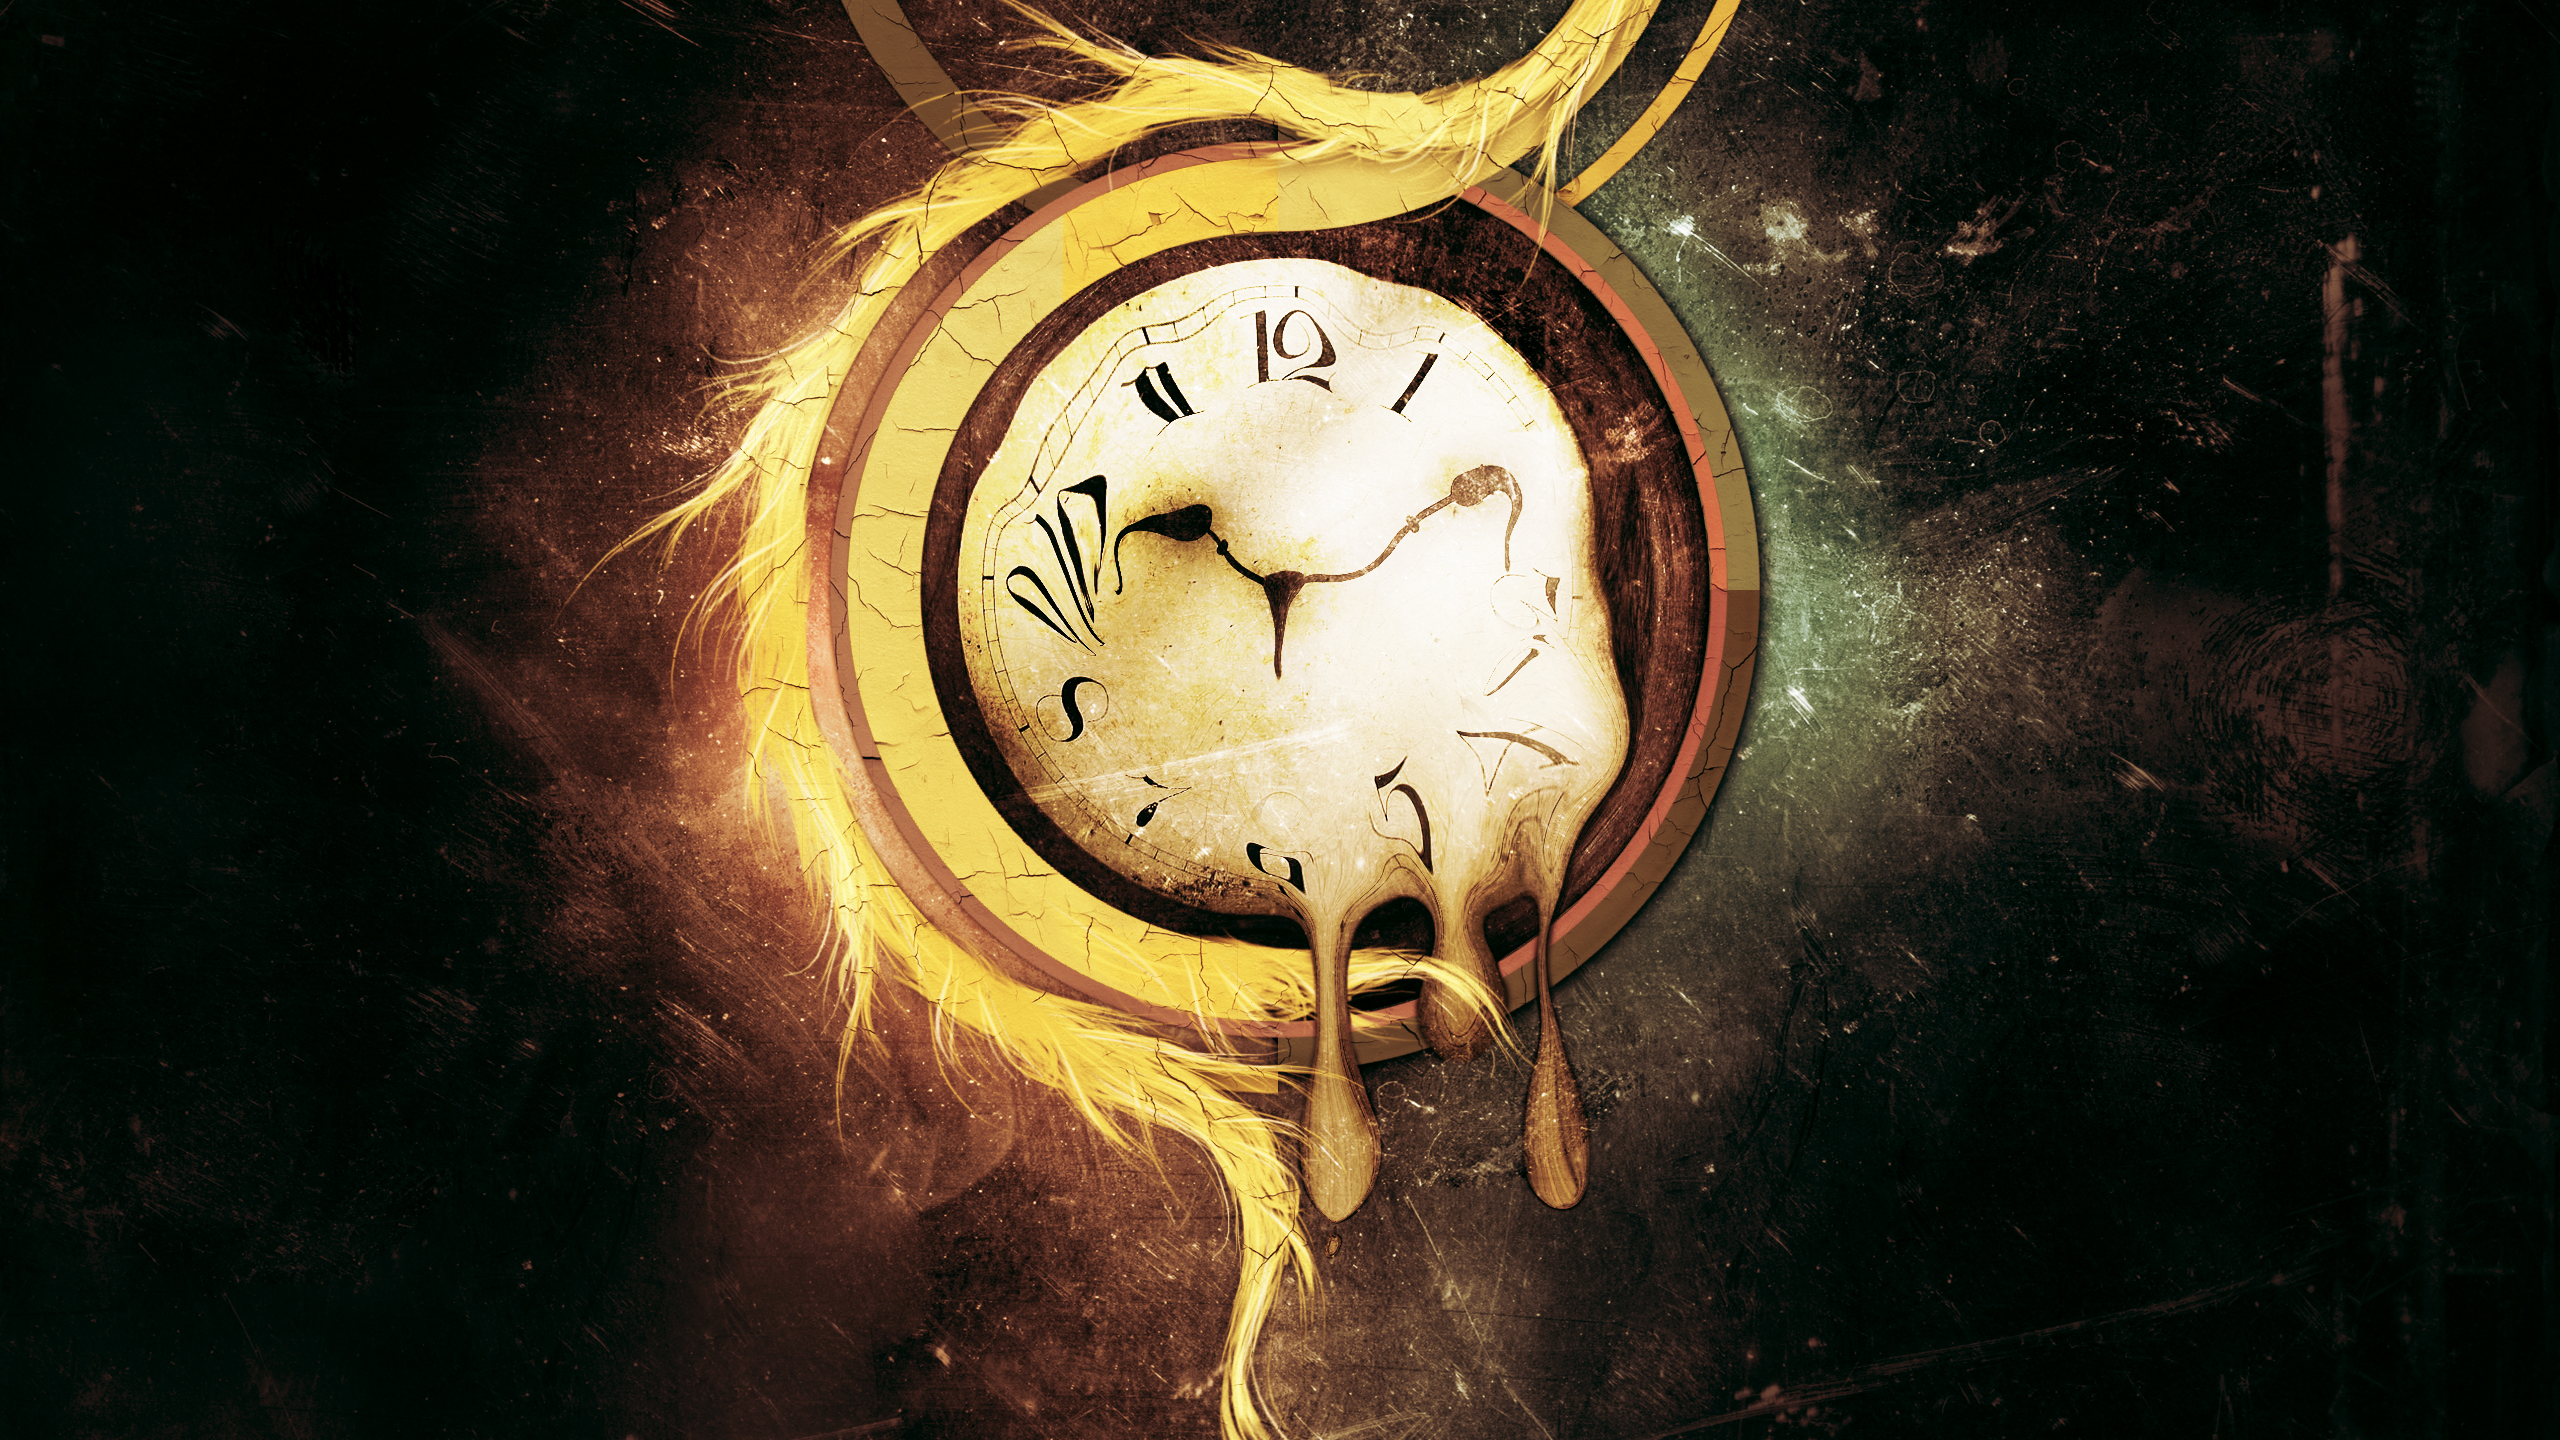 Abstract Artistic Clocks Surrealism Surreal Psychedelic Time Wallpaper